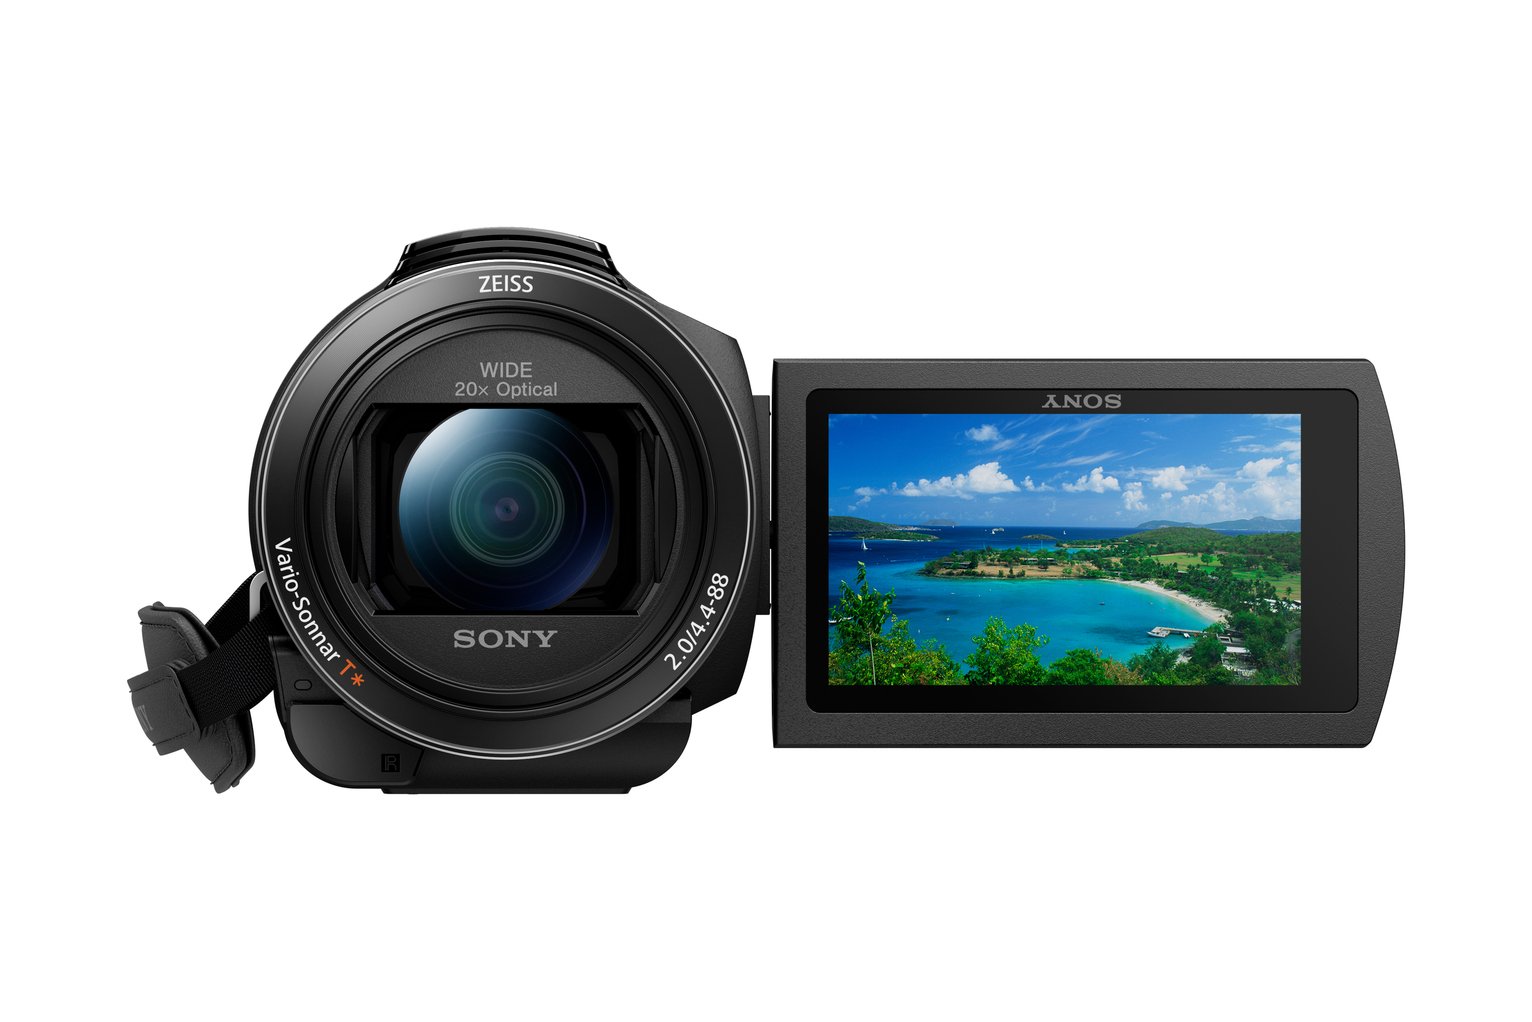 Sony AX43 4K Camcorder Review